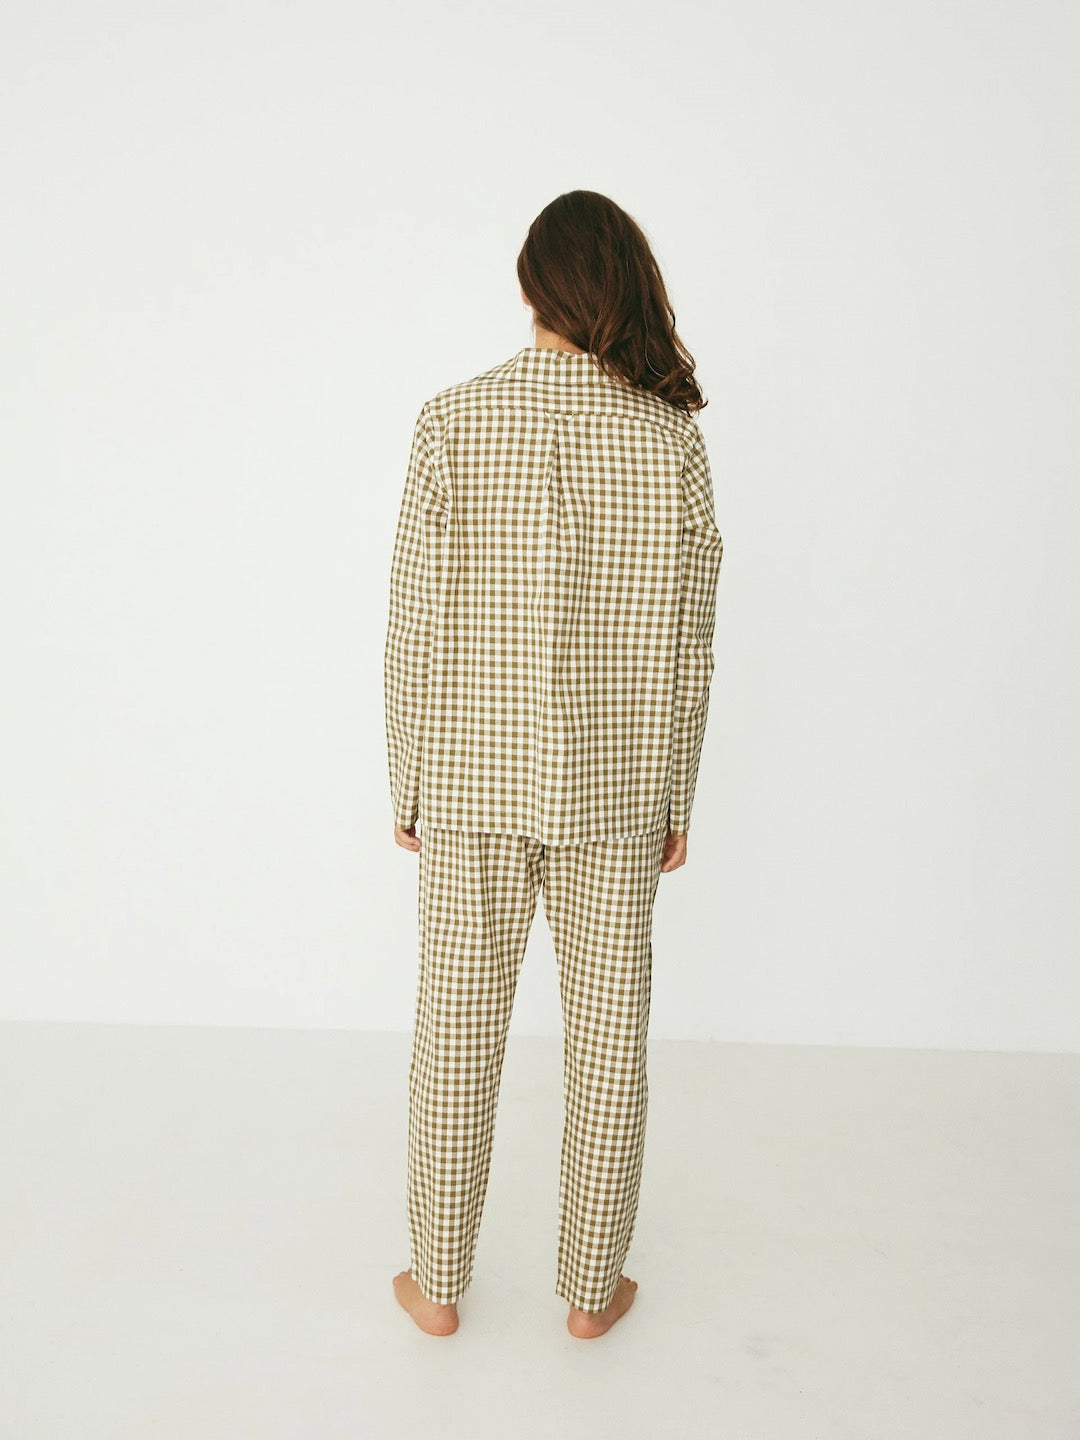 The back view of a woman wearing a Classic Set – Olive Gingham pajama set from general sleep.